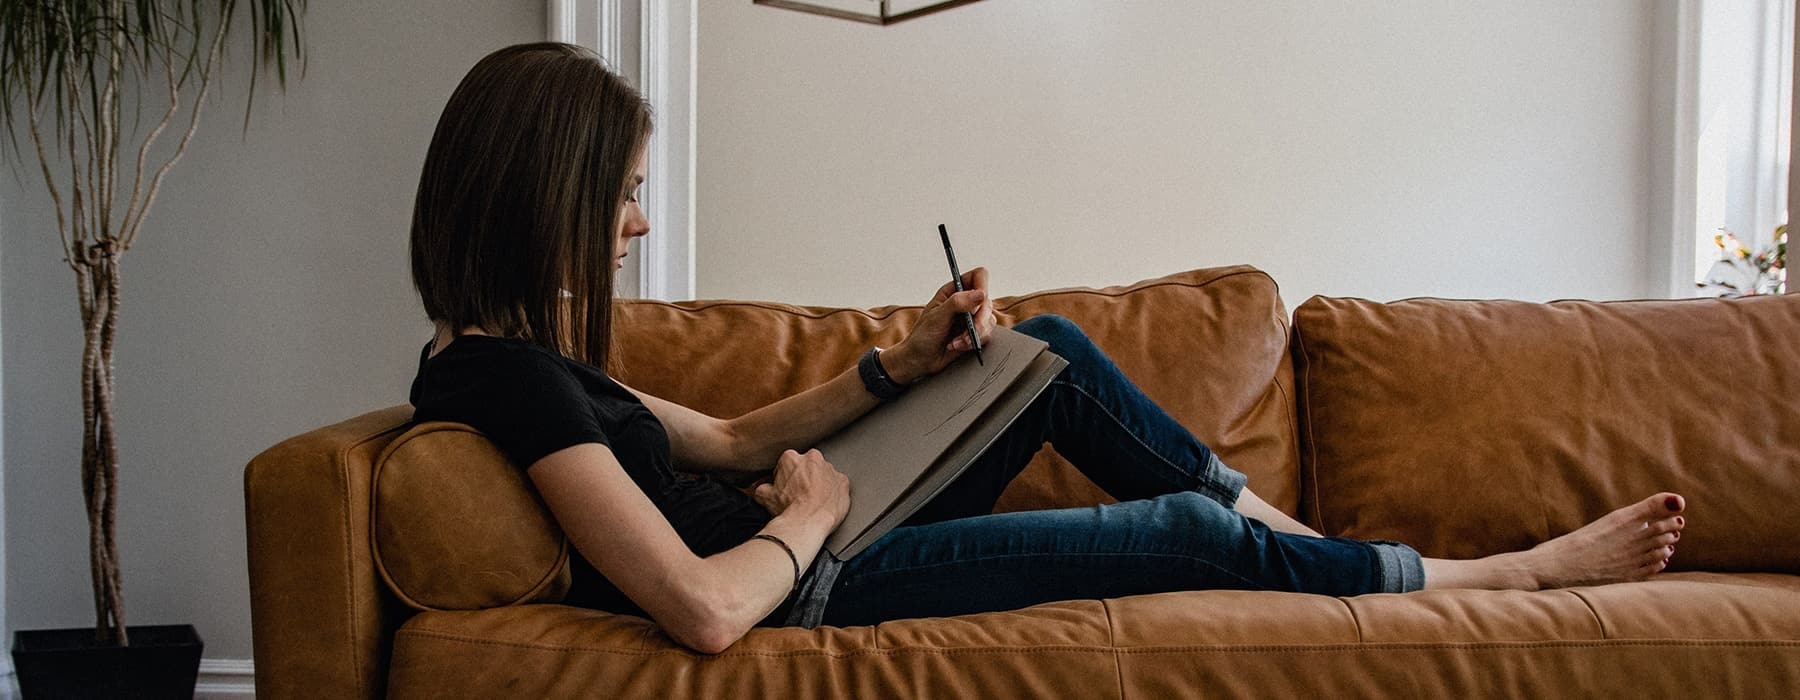 lifestyle image of a woman laying and working on a brown couch